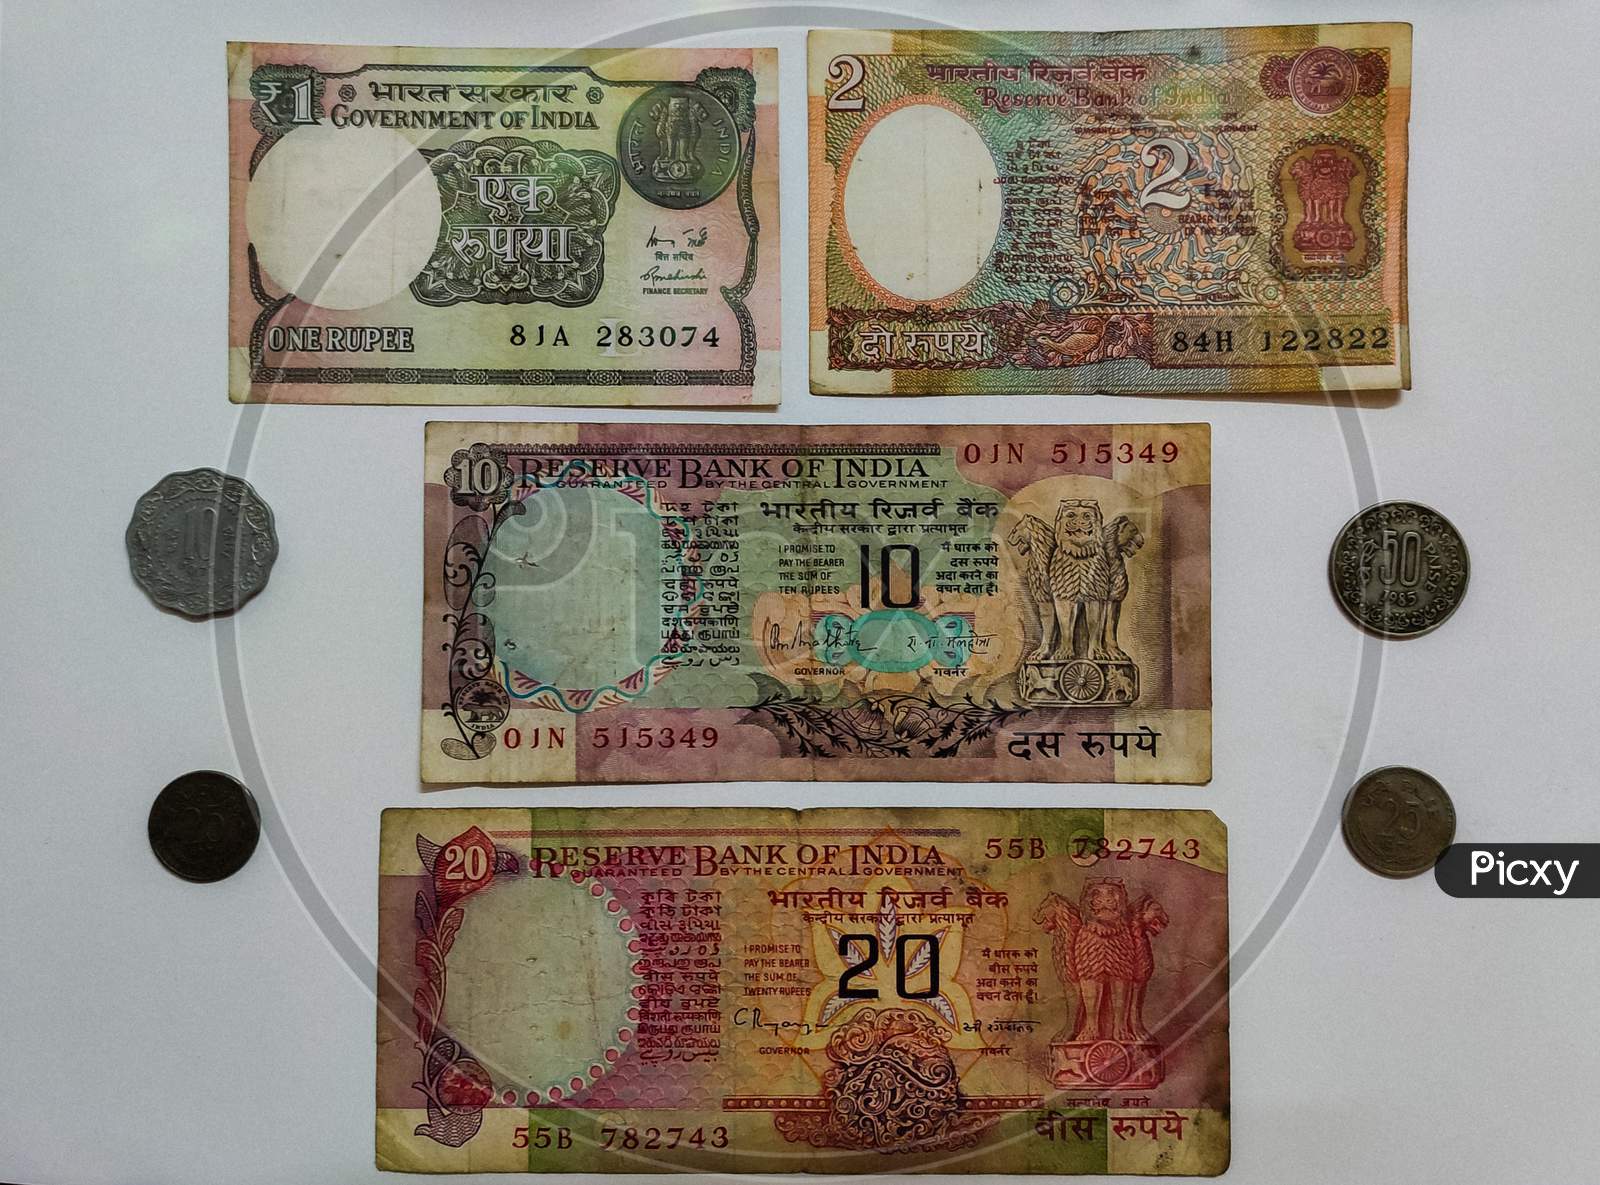 Collection of old currency notes and coins of India.